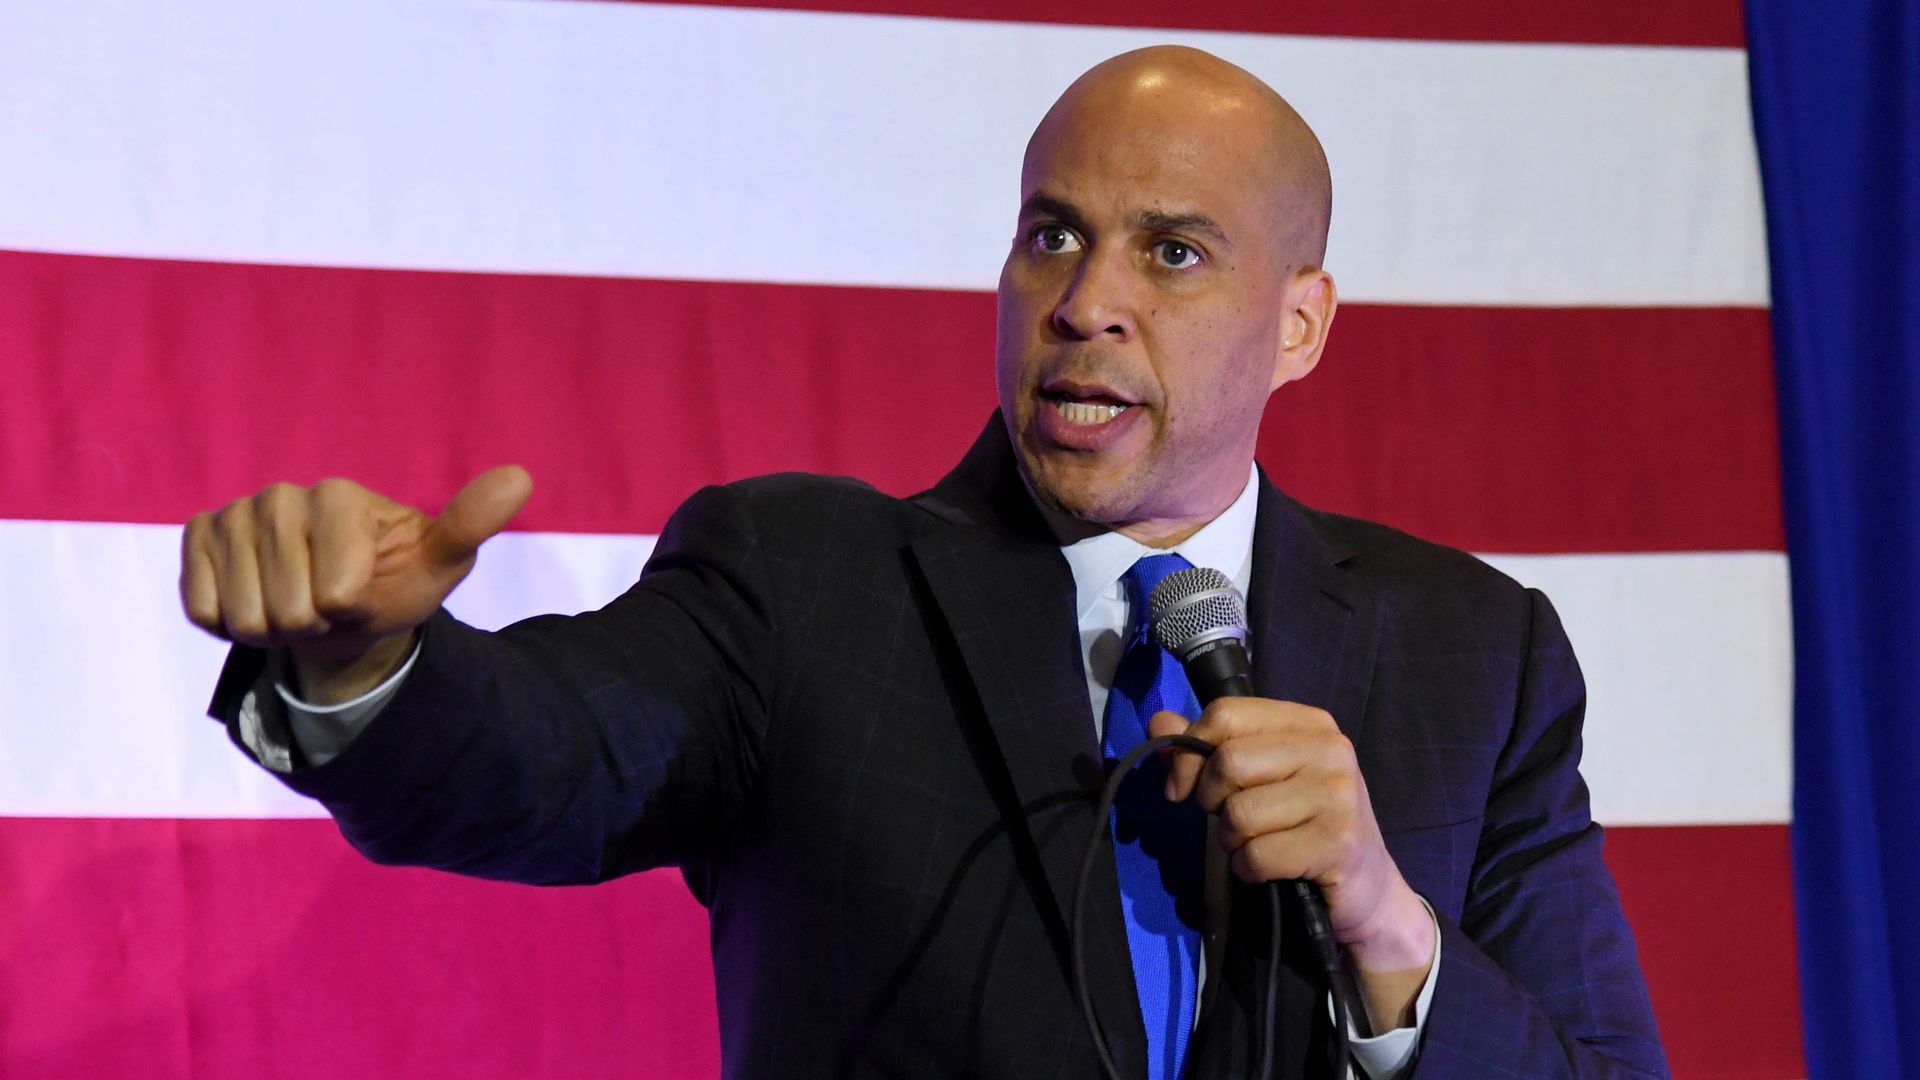 Corey Booker pledged to expand social security during the CNN town hall Wednesday.